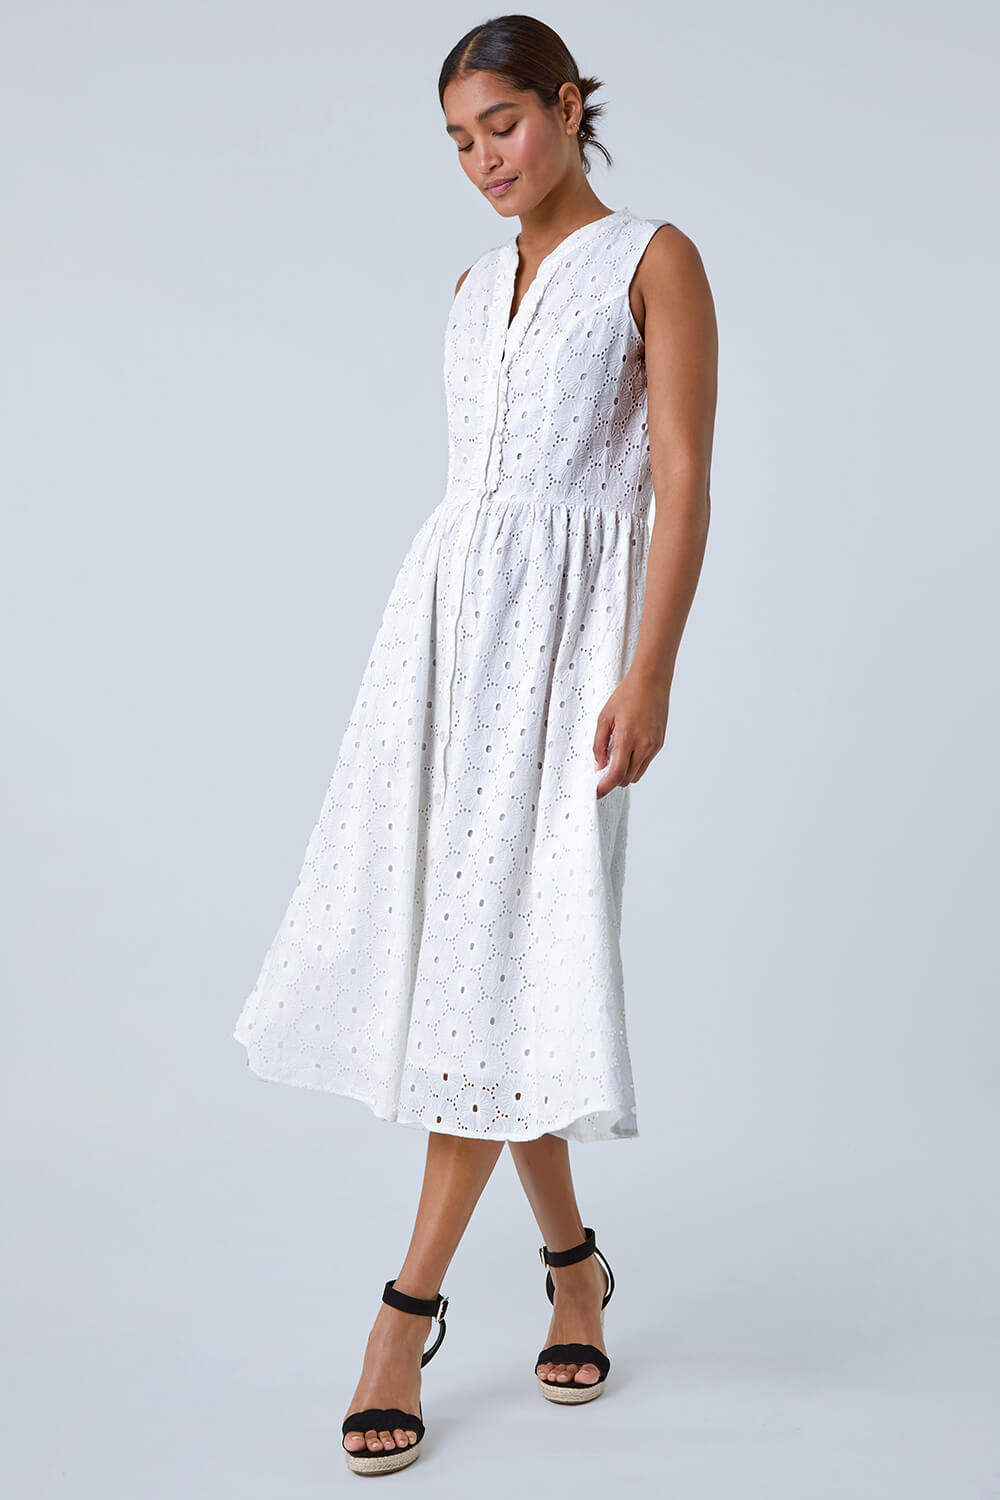 White Floral Cotton Broderie Midi Dress, Image 2 of 5